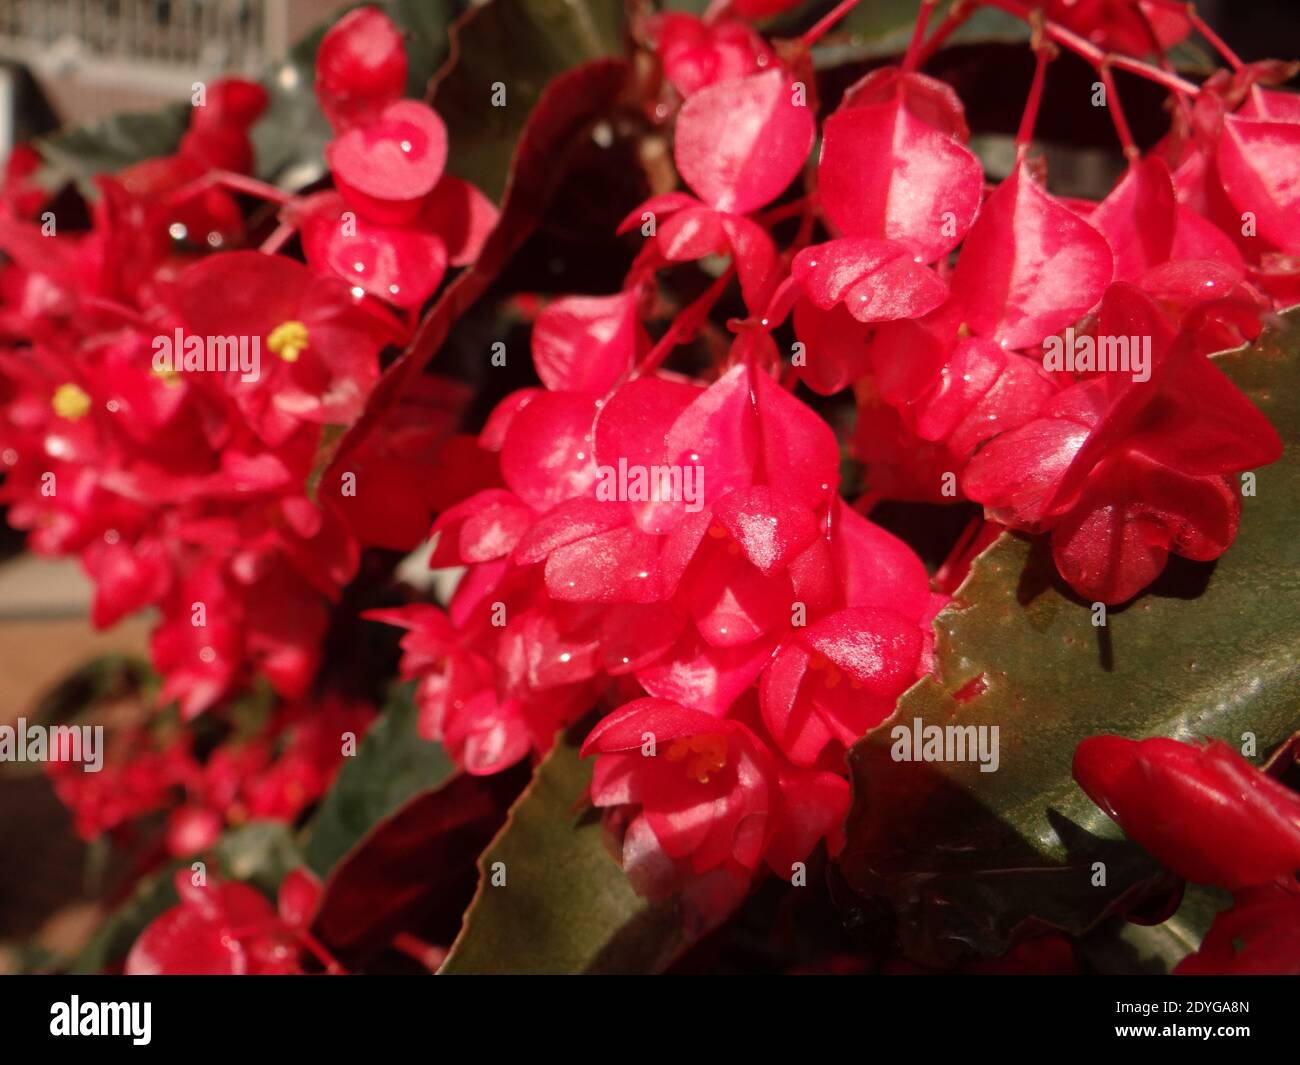 A close up shot of coral begonia flowers Stock Photo